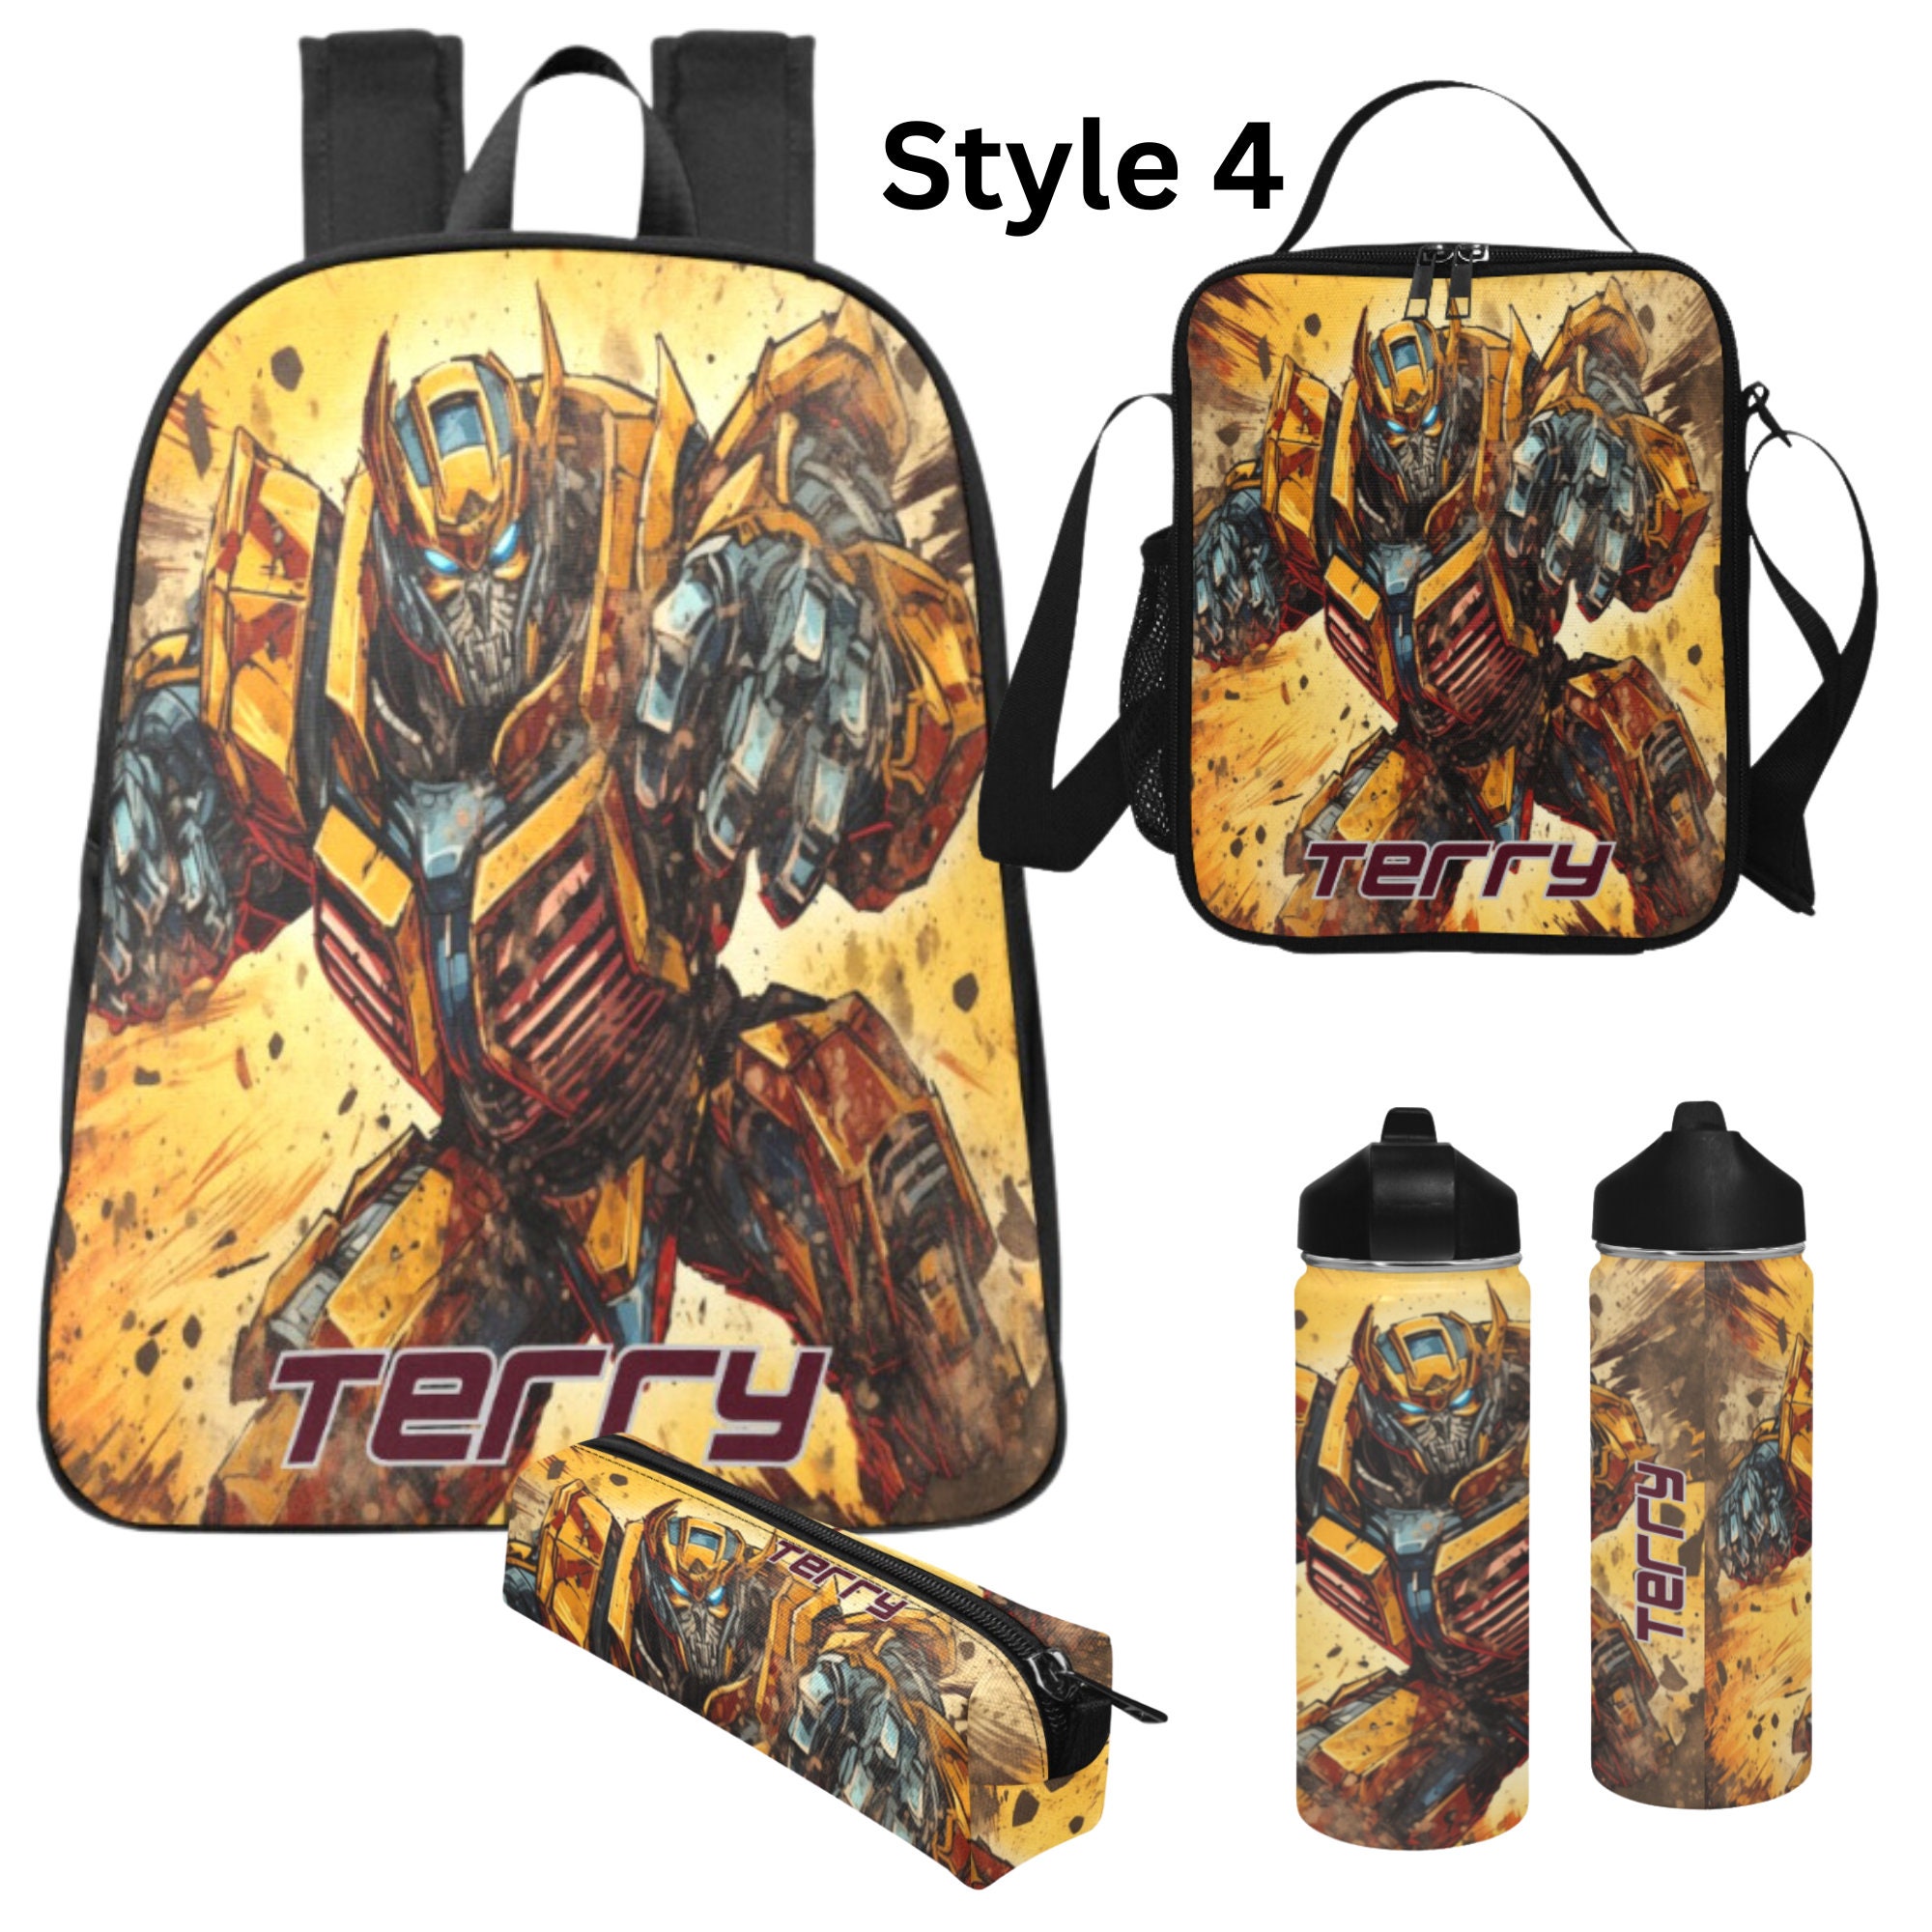 Transformers Full Size Backpack Lunchbox Set